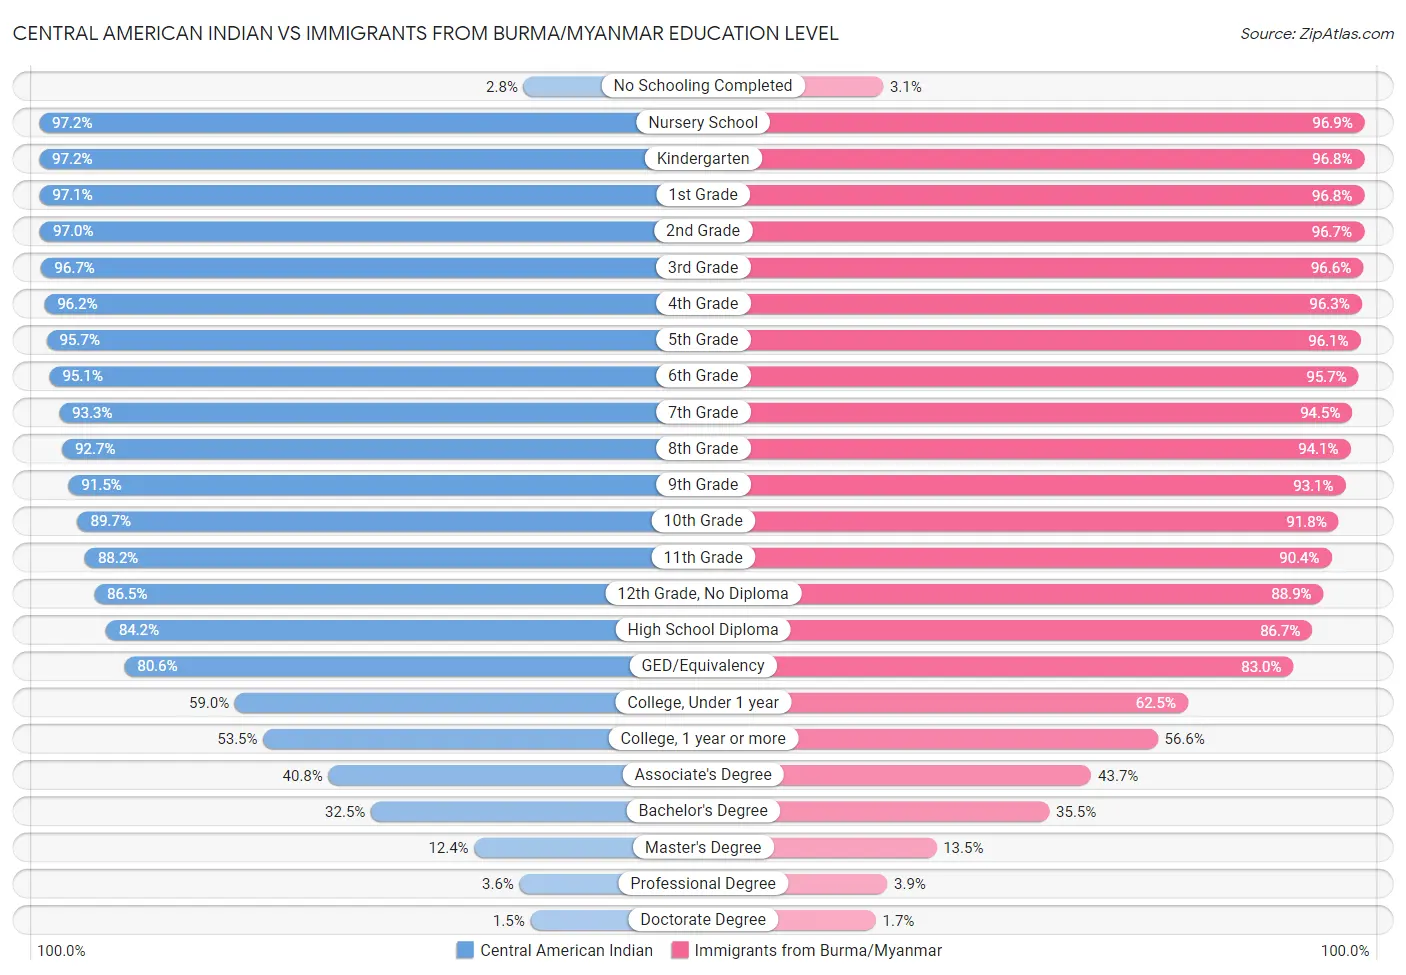 Central American Indian vs Immigrants from Burma/Myanmar Education Level